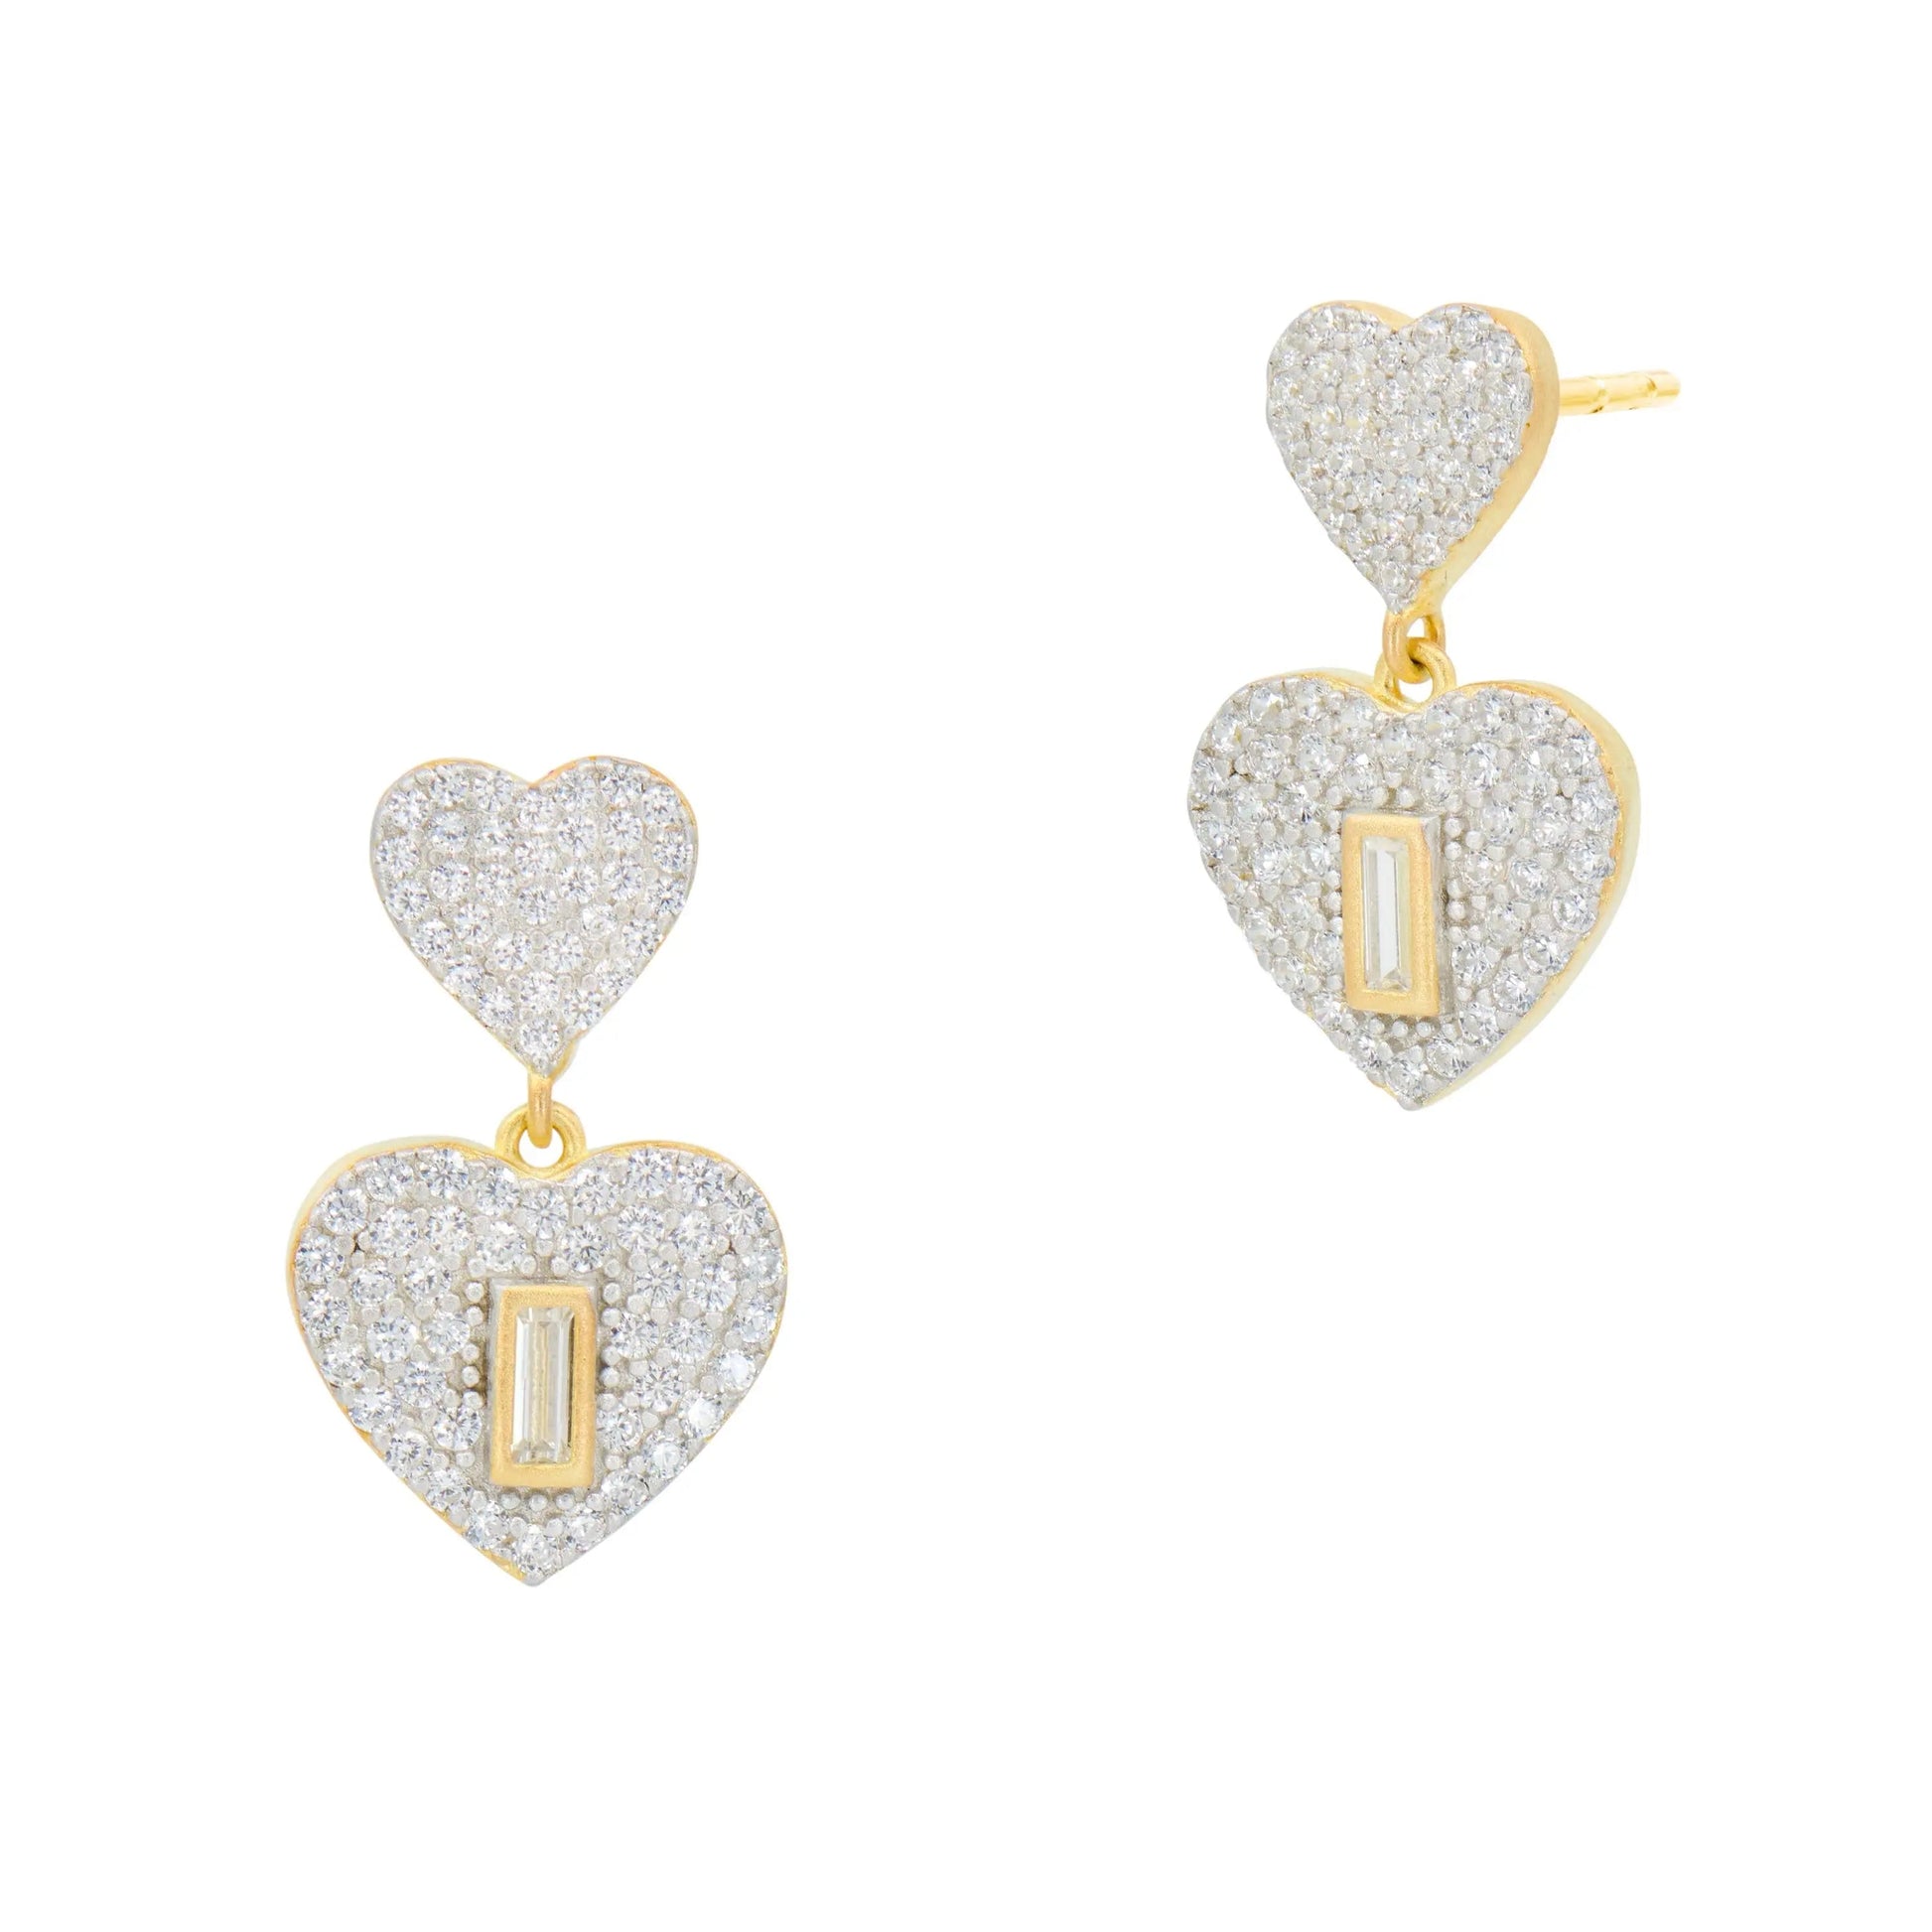  From the Heart Drop Earrings Valentine's Day Gifts EARRING